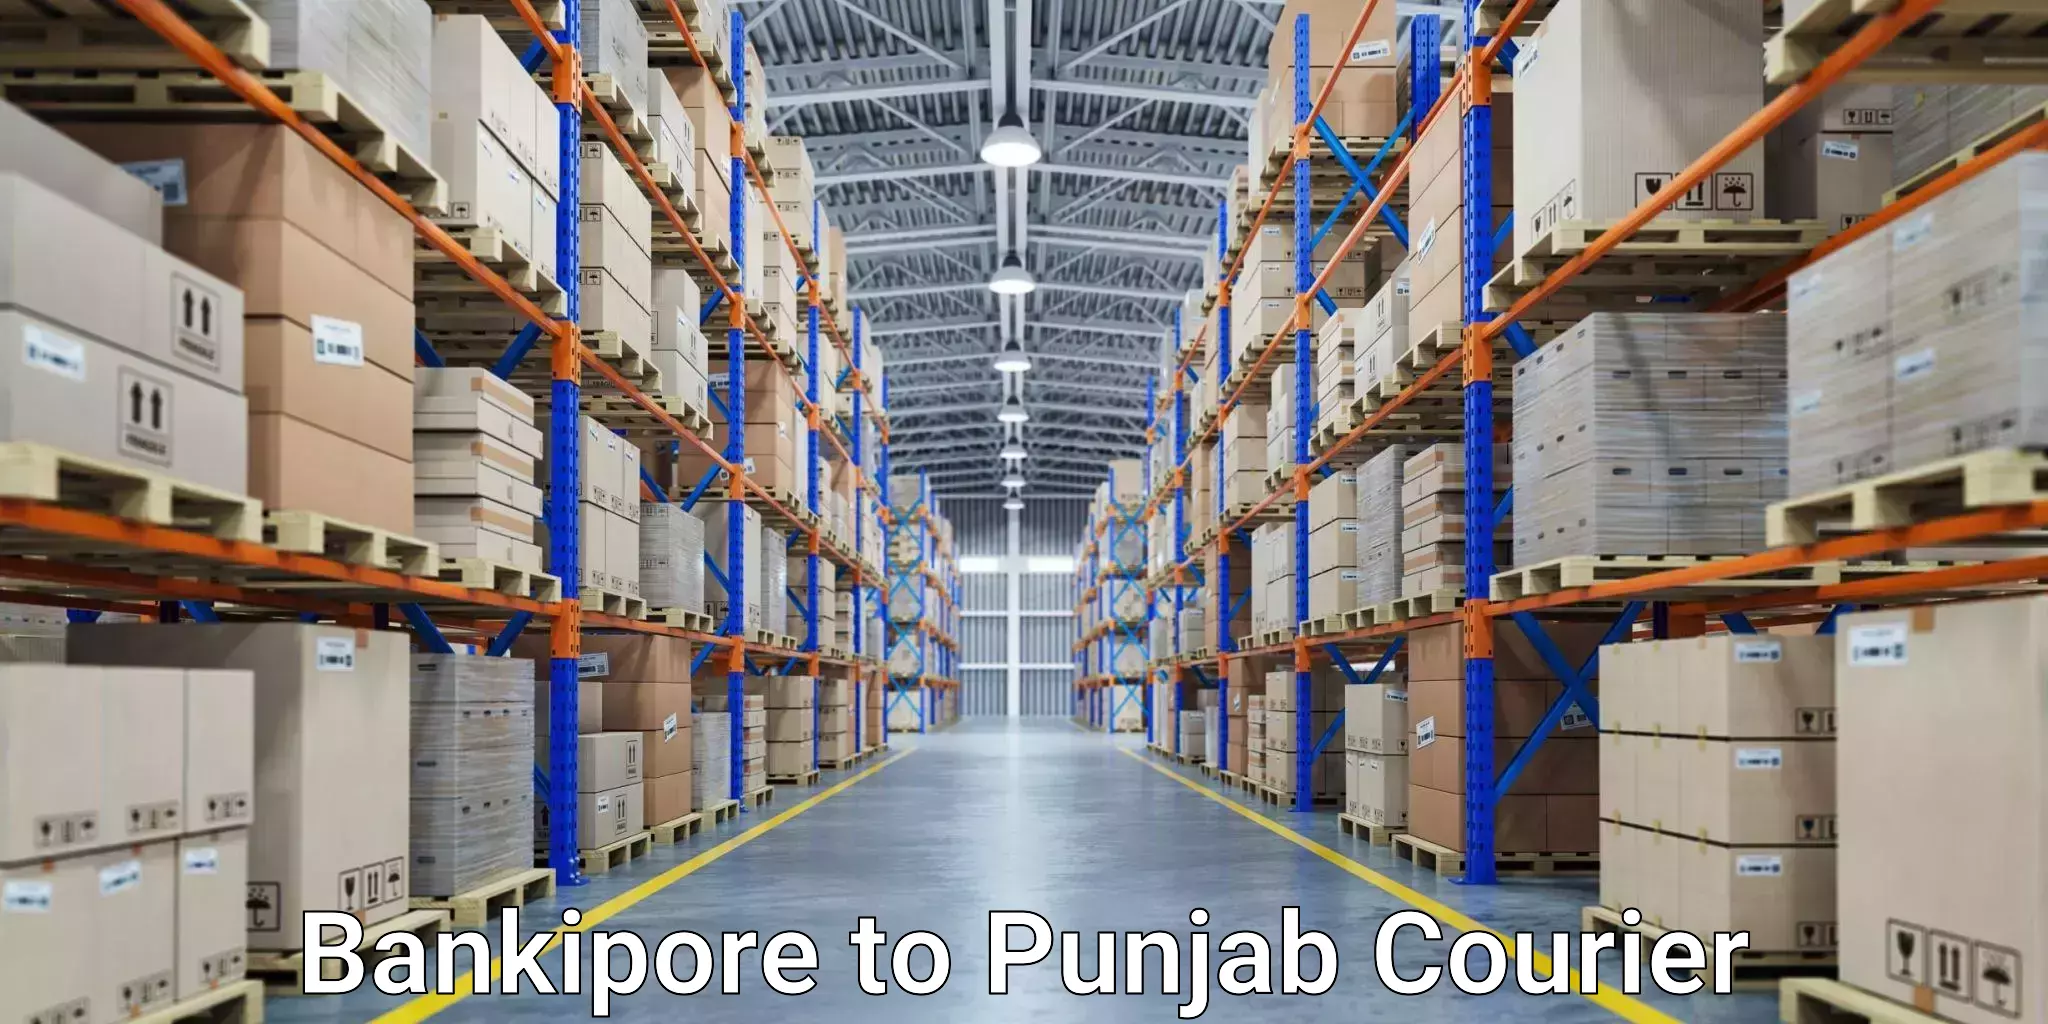 Business delivery service Bankipore to Punjab